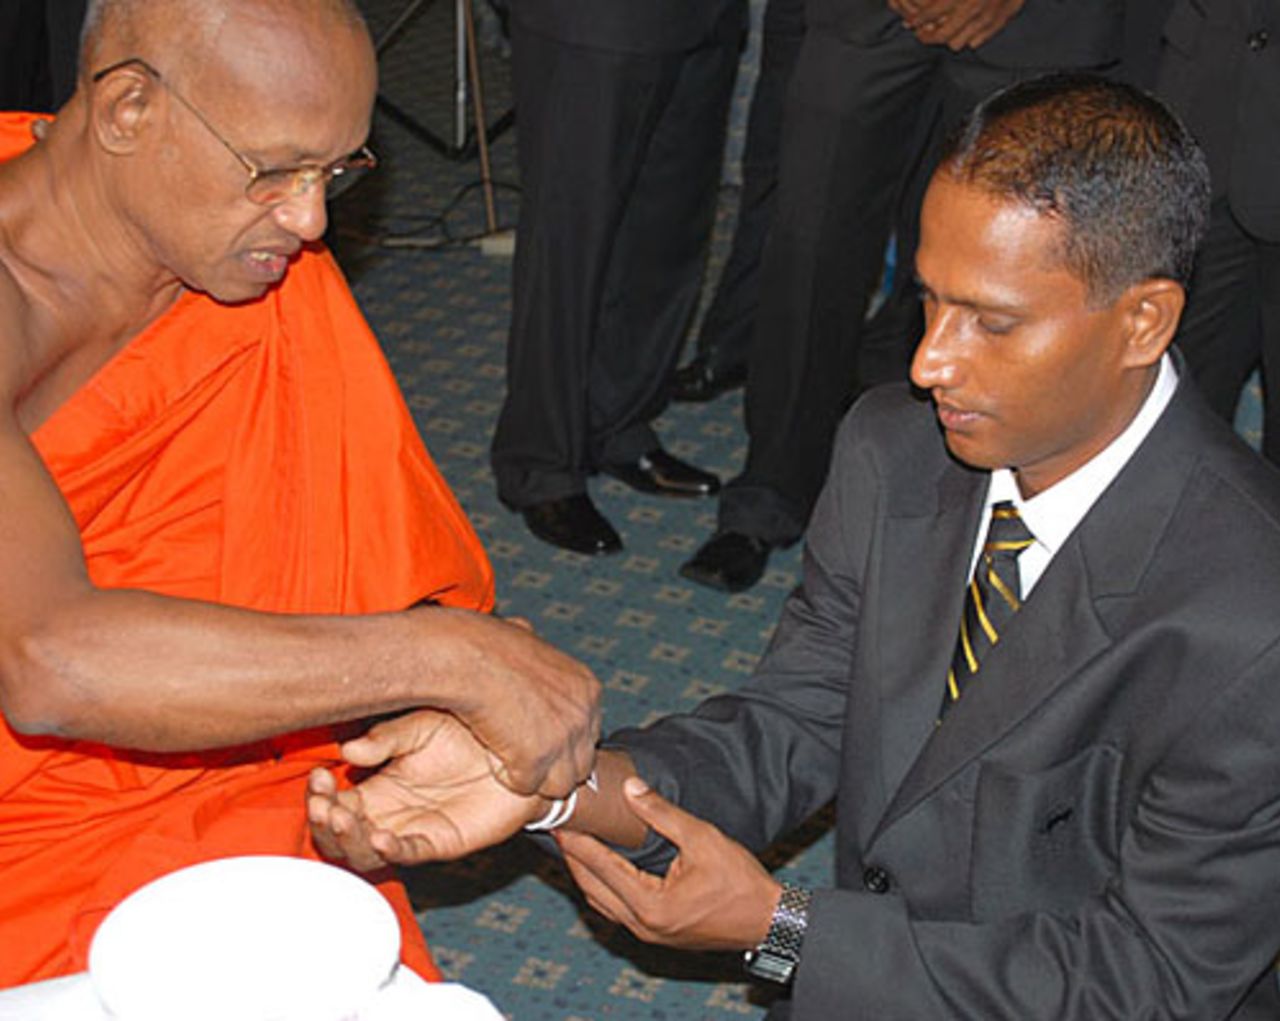 Indika de Saram gets the blessings of a monk, Colombo, May 28, 2009